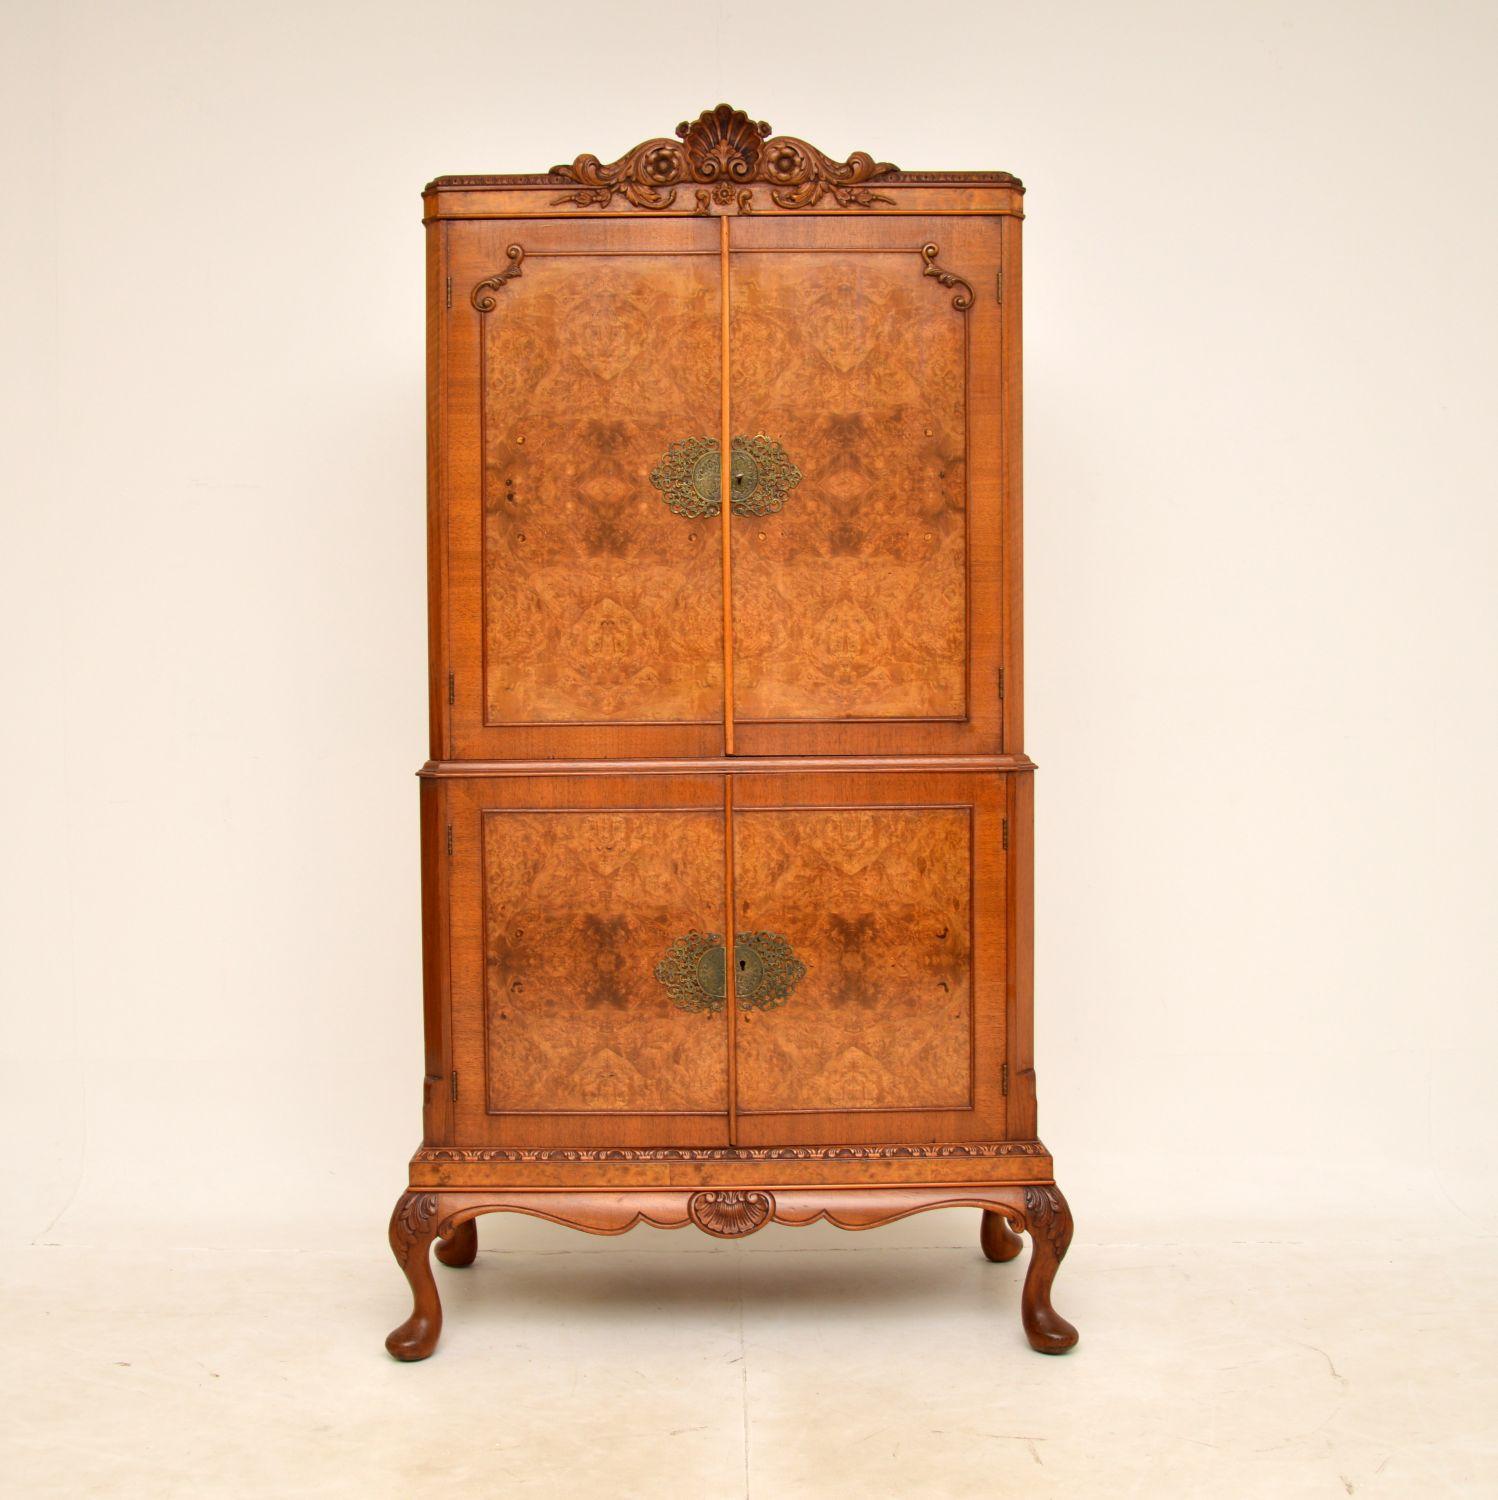 A stunning antique walnut drinks cabinet in the Queen Anne style. This was made in England, it dates from around the 1920-1930s.

It is of superb quality, with spectacular walnut grain patterns and fine, crisp carving throughout. The top section